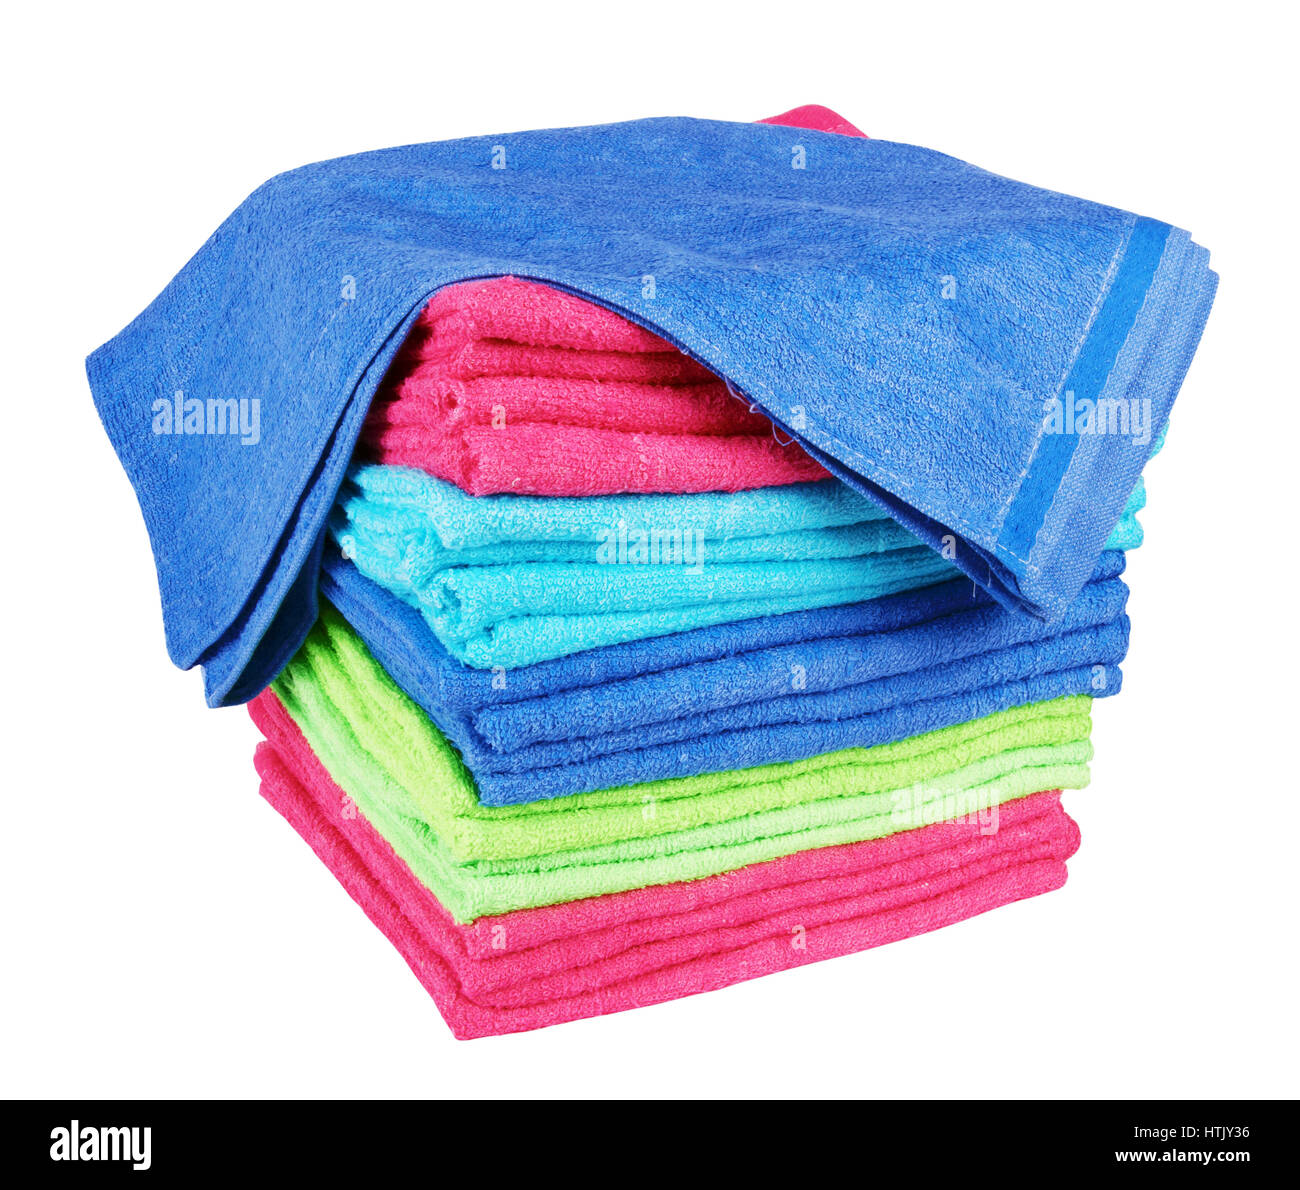 stacked colorful towels on a white background Stock Photo